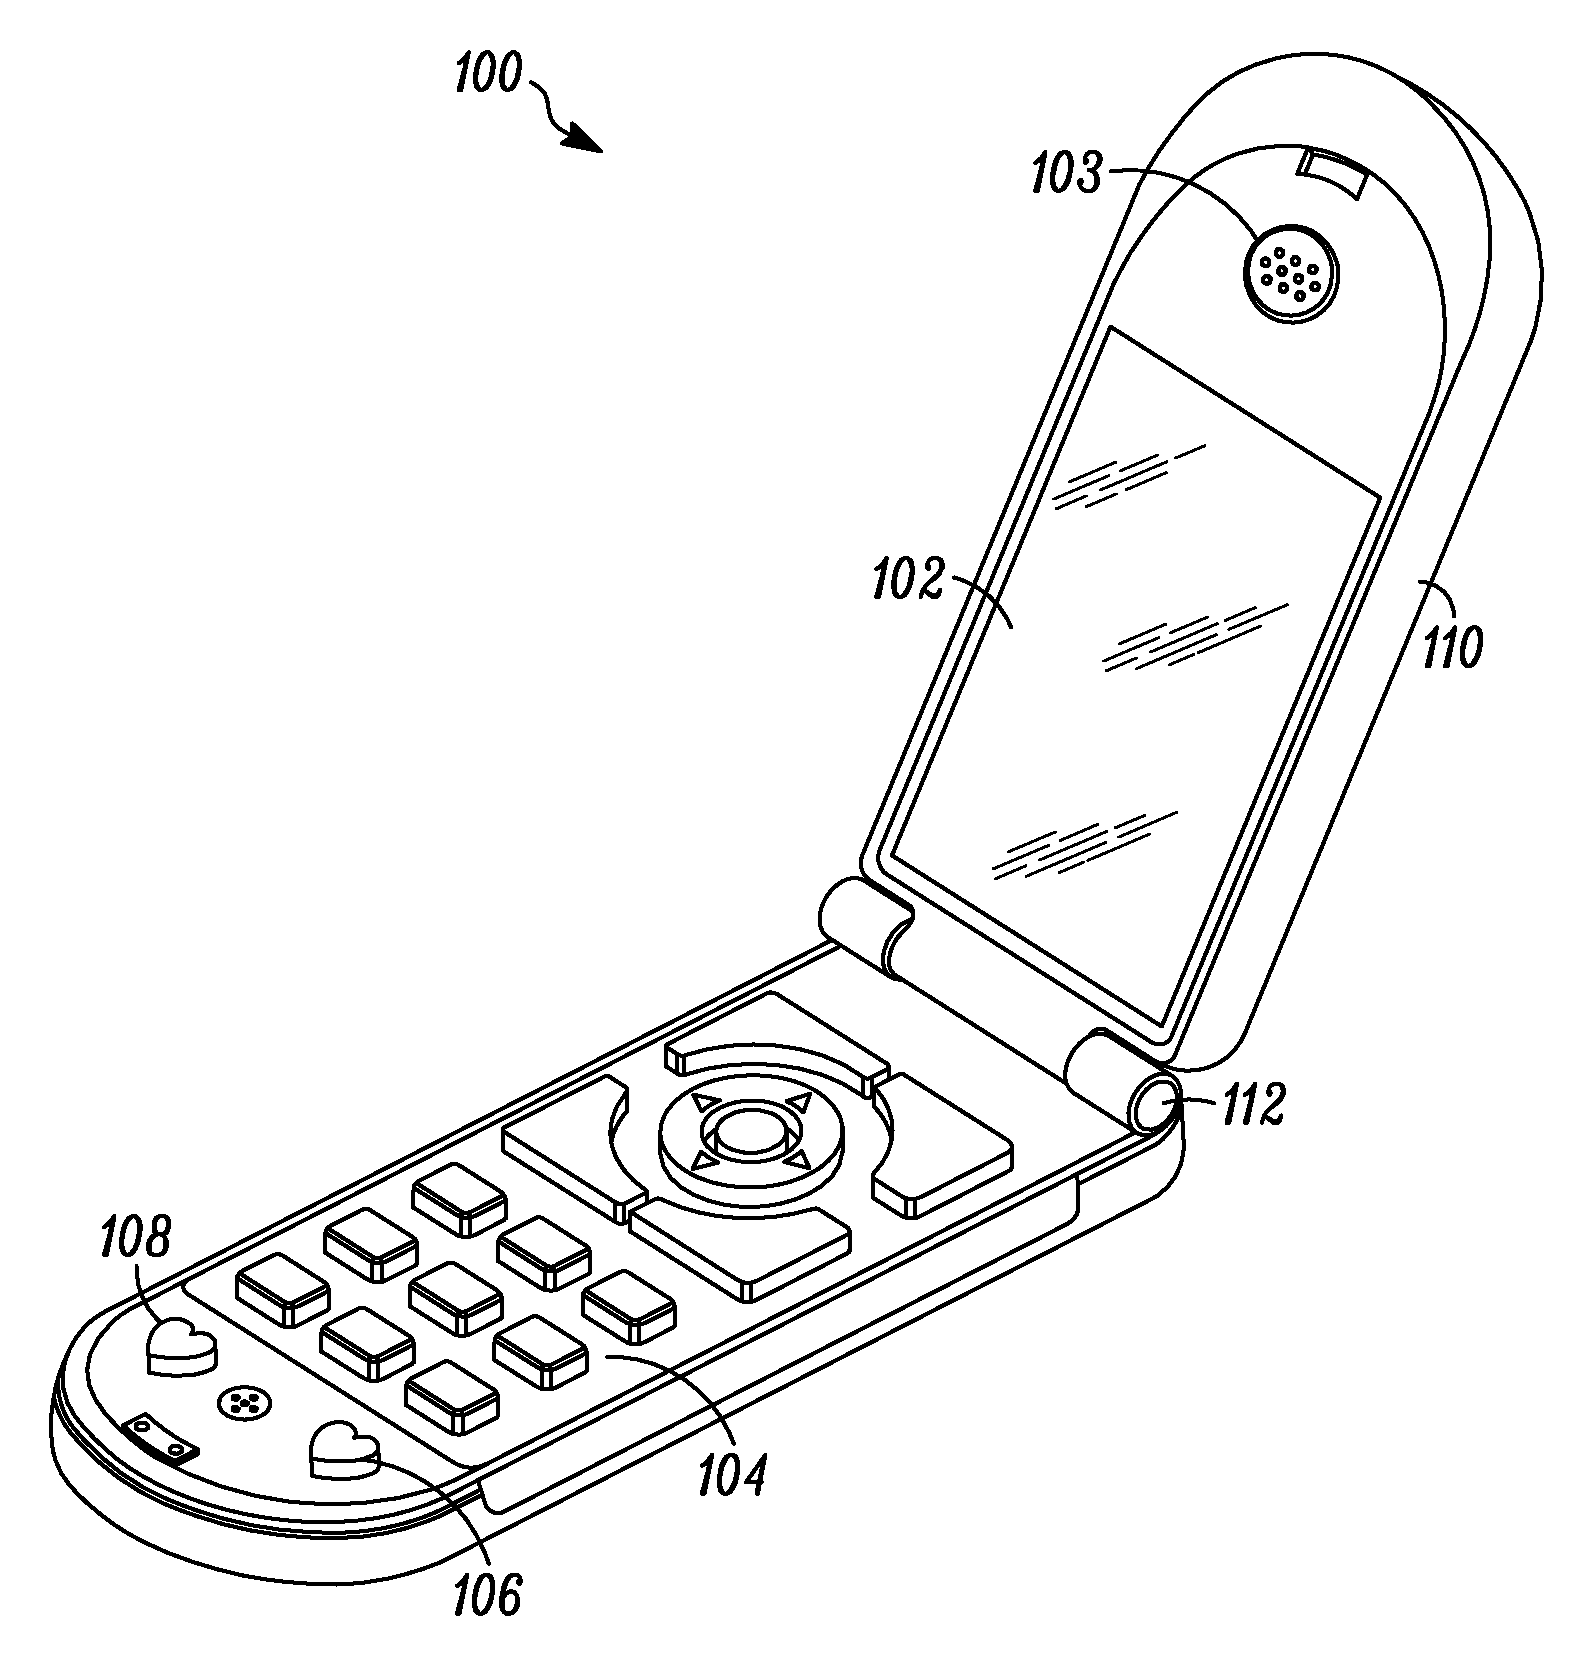 Method and Apparatus for Controlling a Keypad of a Device